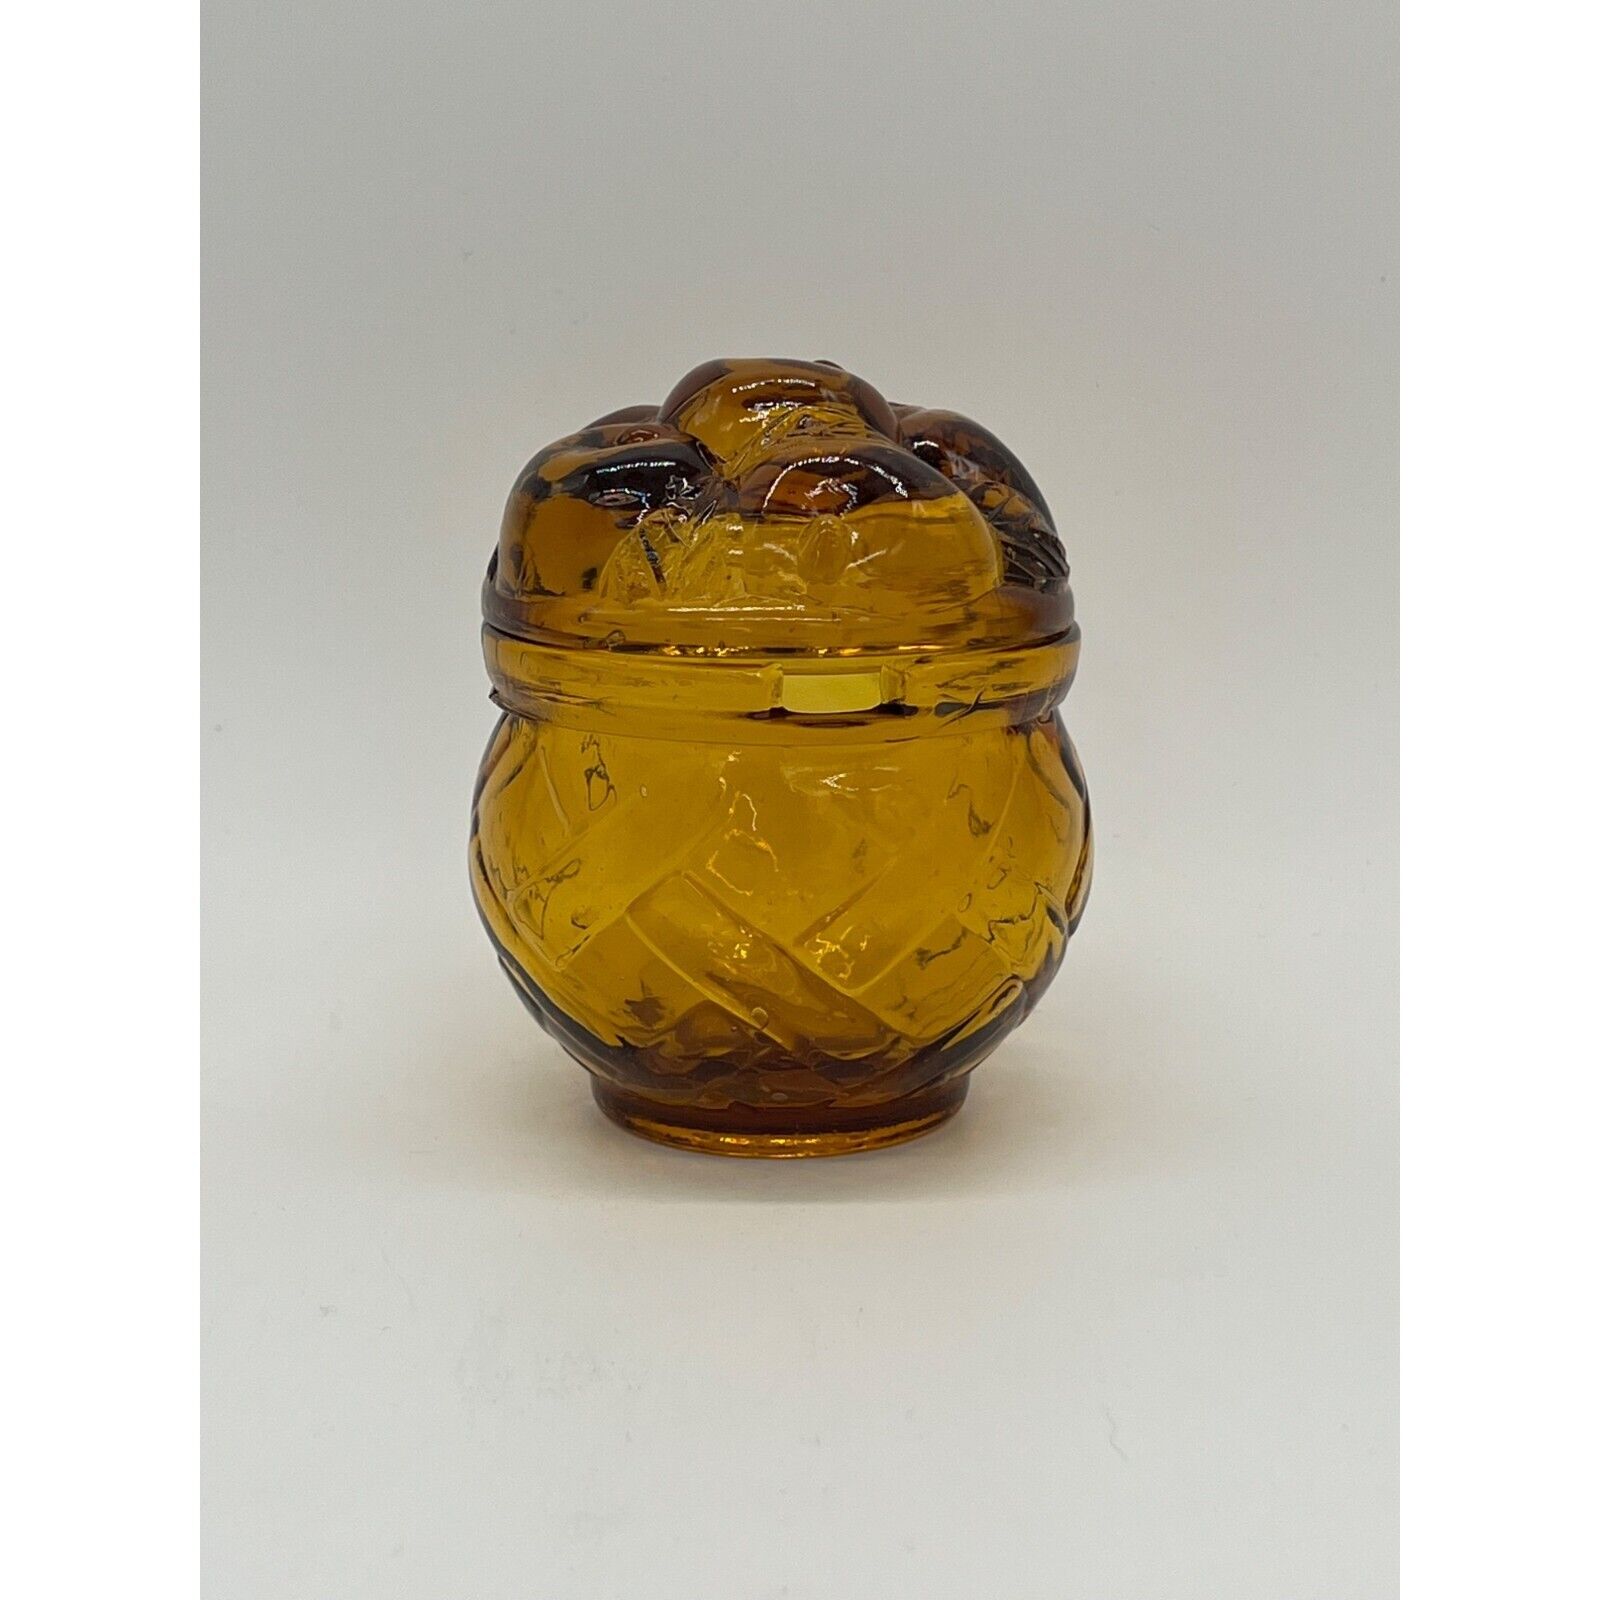 Adorable Vintage Honey/Jam Lidded Jar w/space for spoon, not included